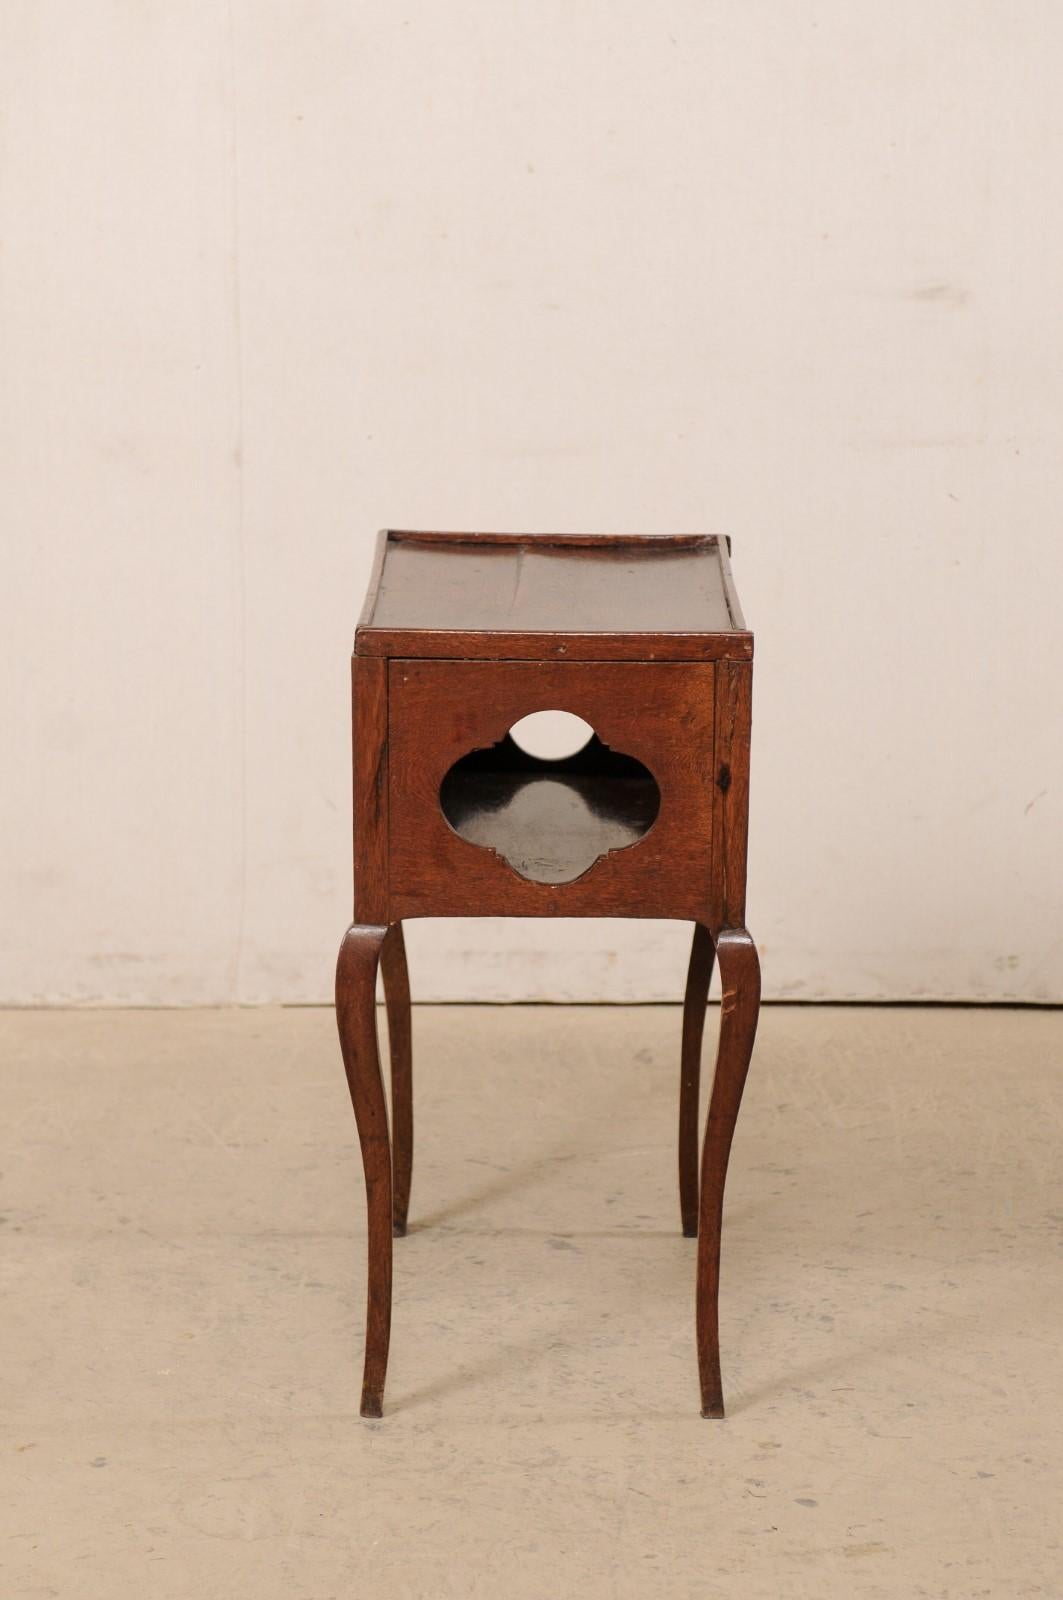 19th Century 19th C. French Side Table with Quatrefoil Cut-Outs at Sides, Lower Shelf/Cubie